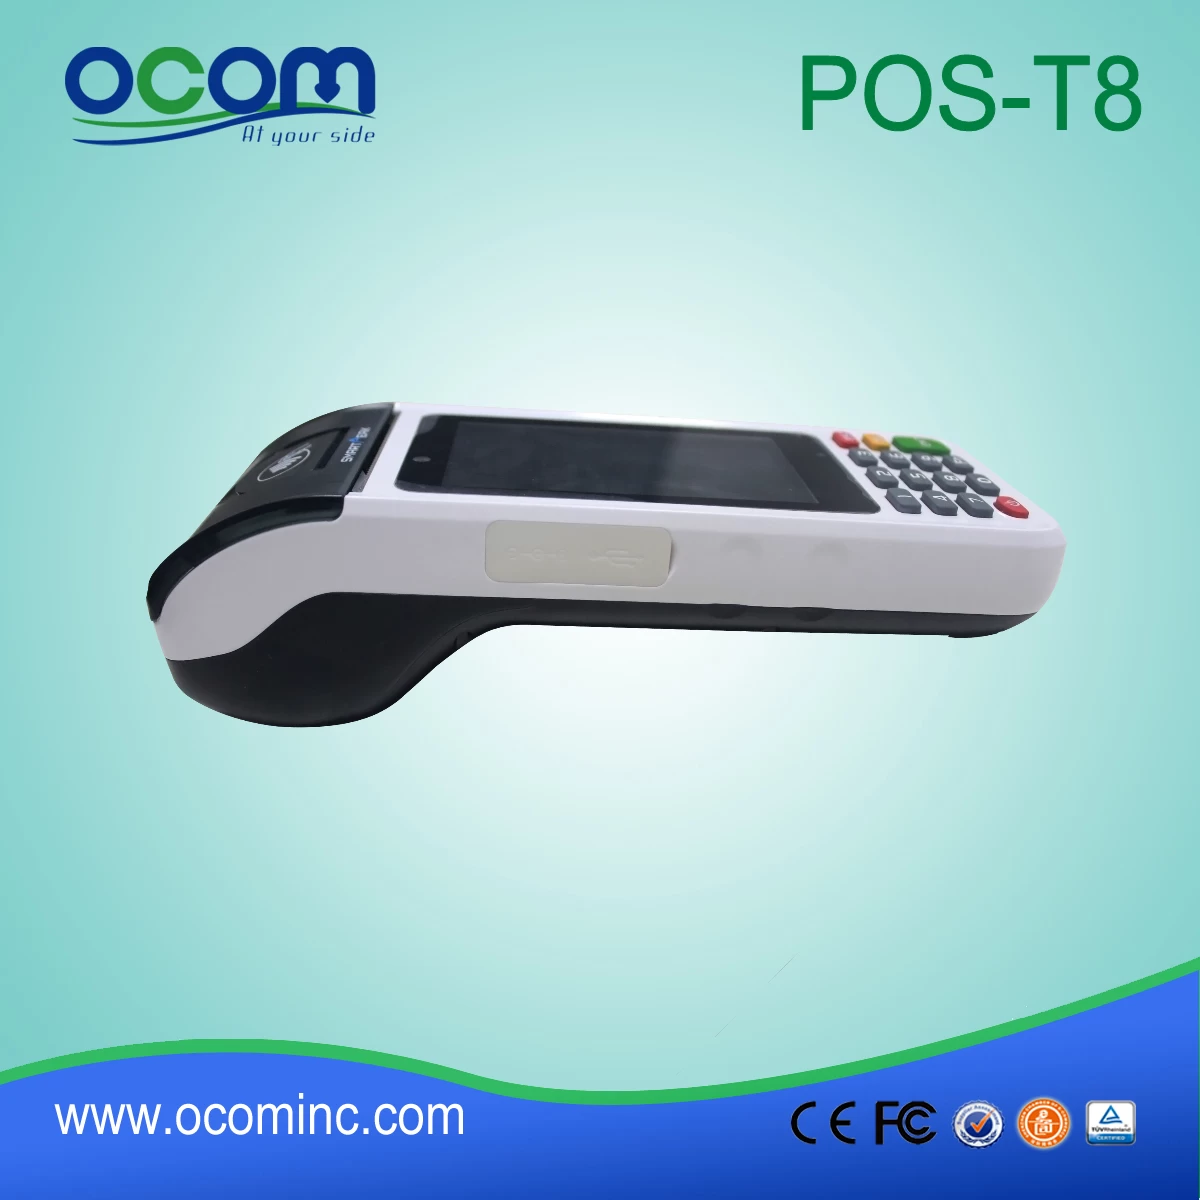 Handheld Android Pos Terminal in Pos System ( POS-T8)